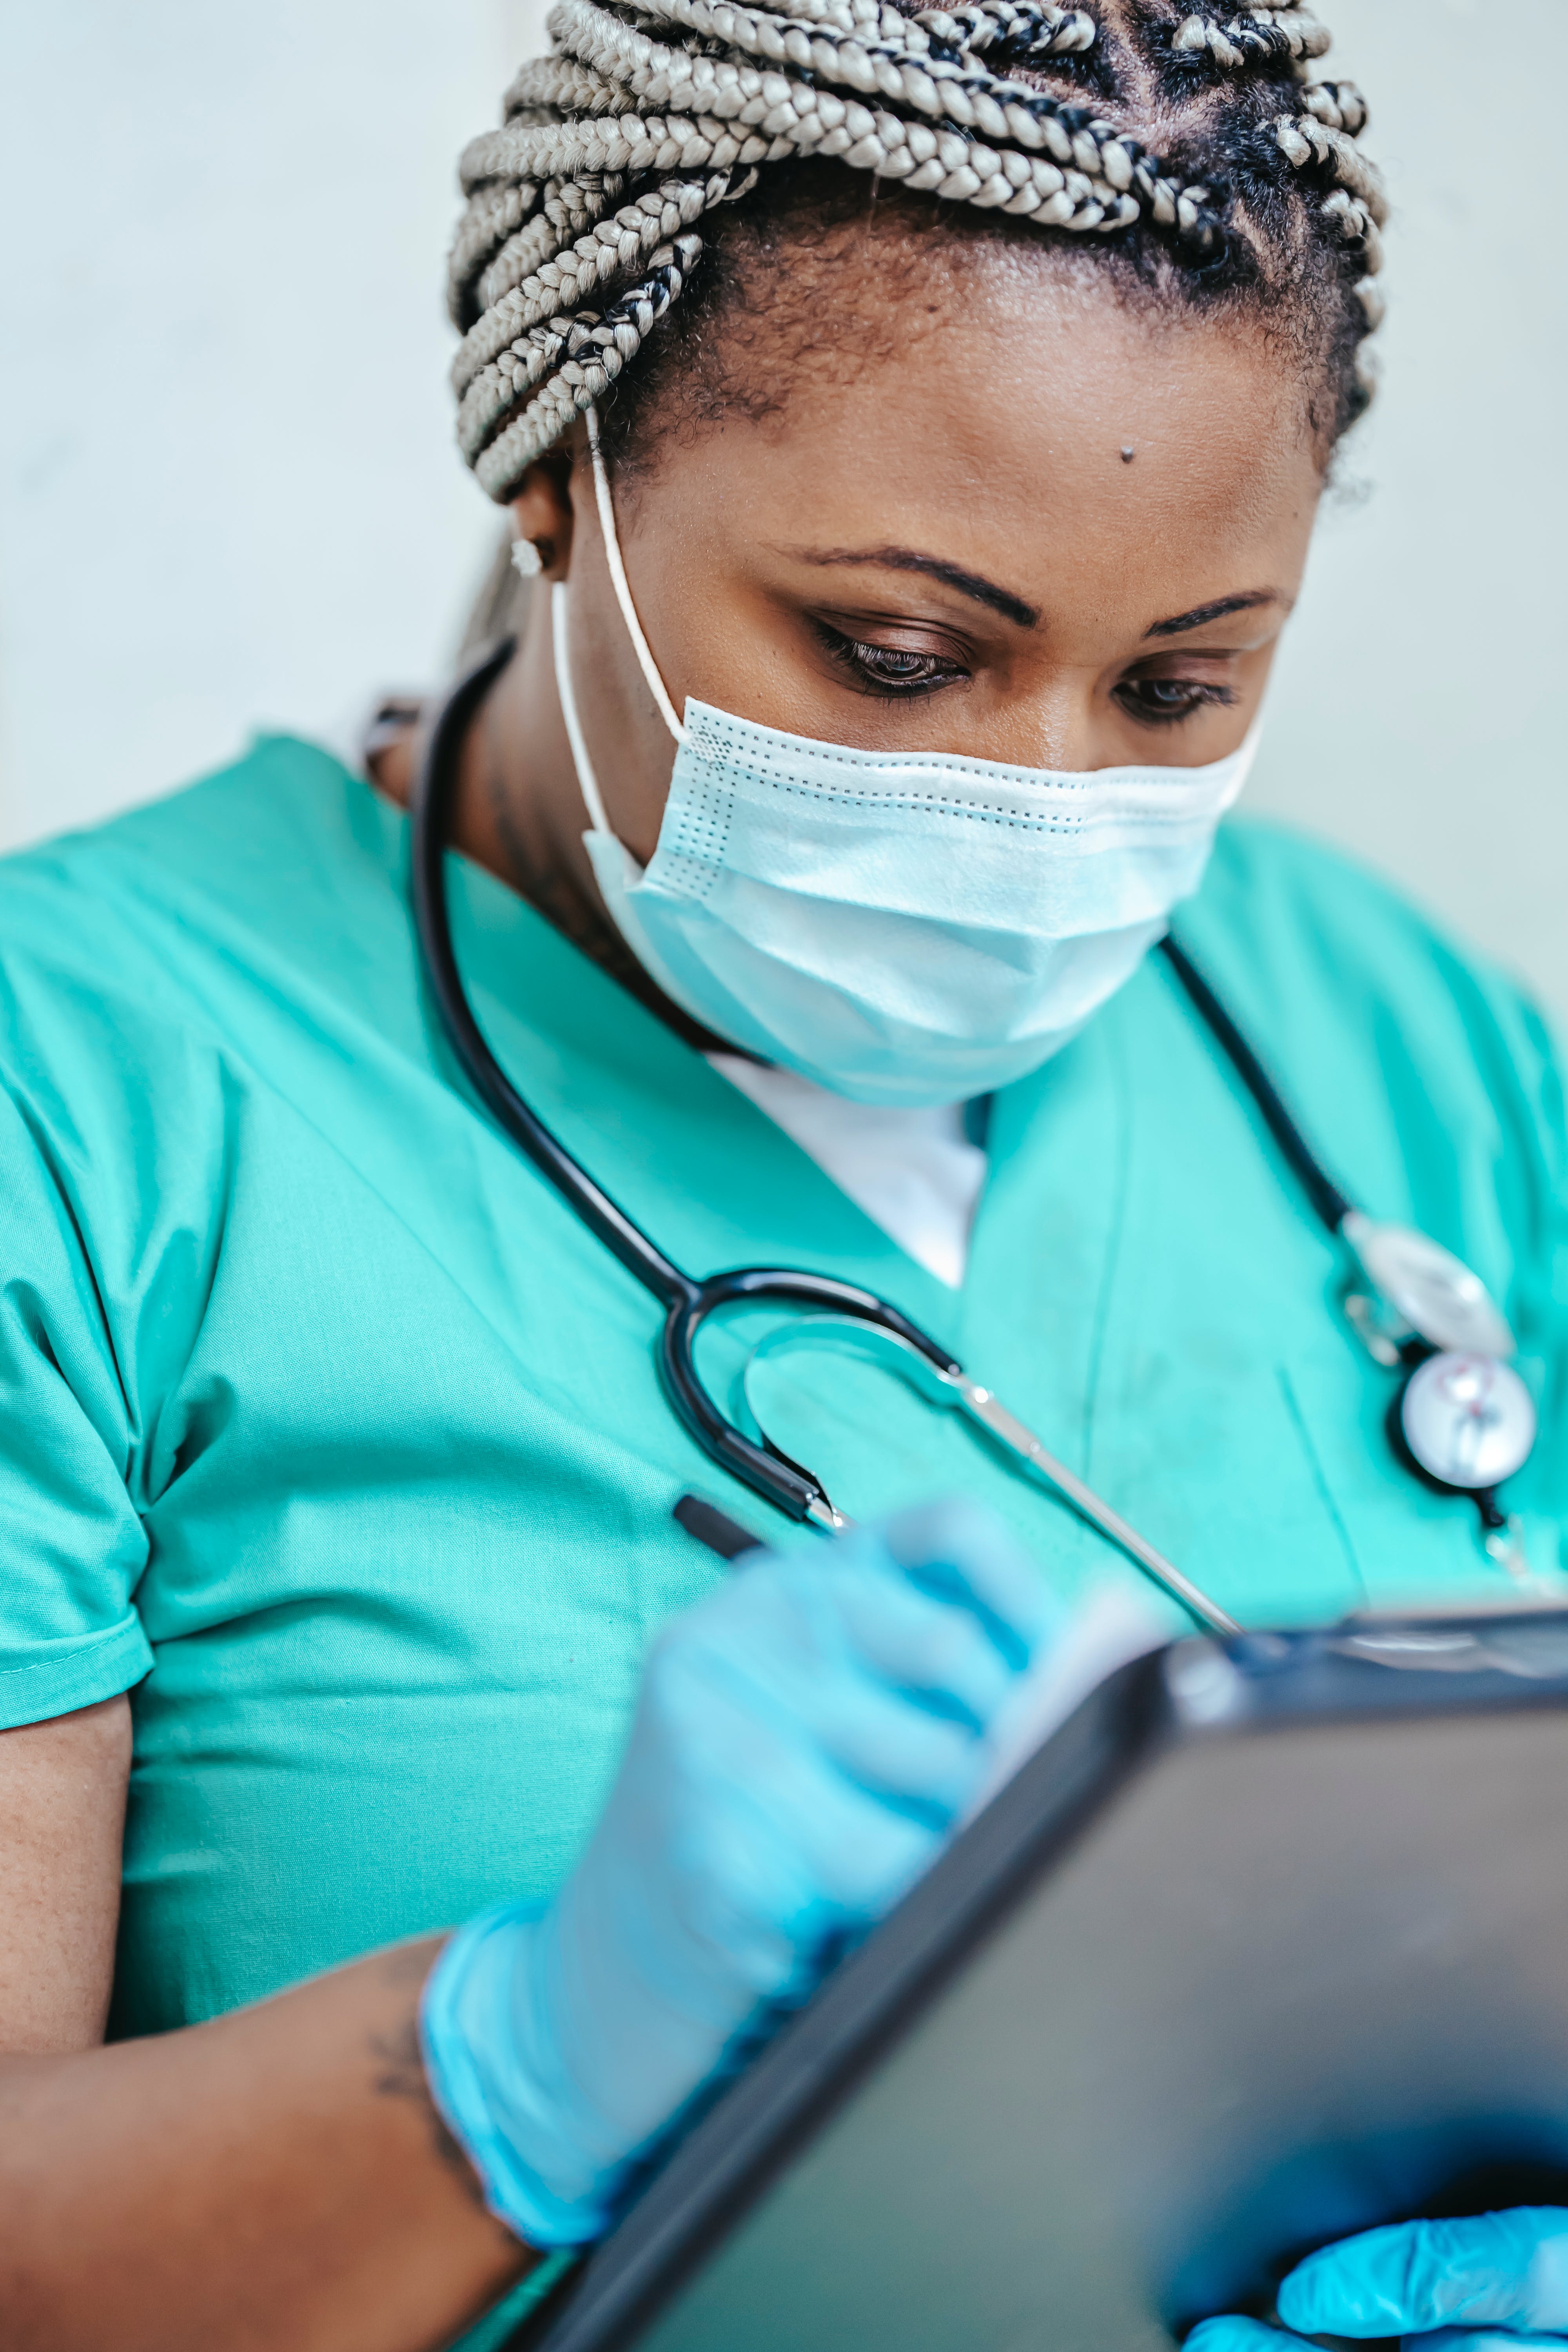 A medical professional looking through a patient's chart | Source: Pexels